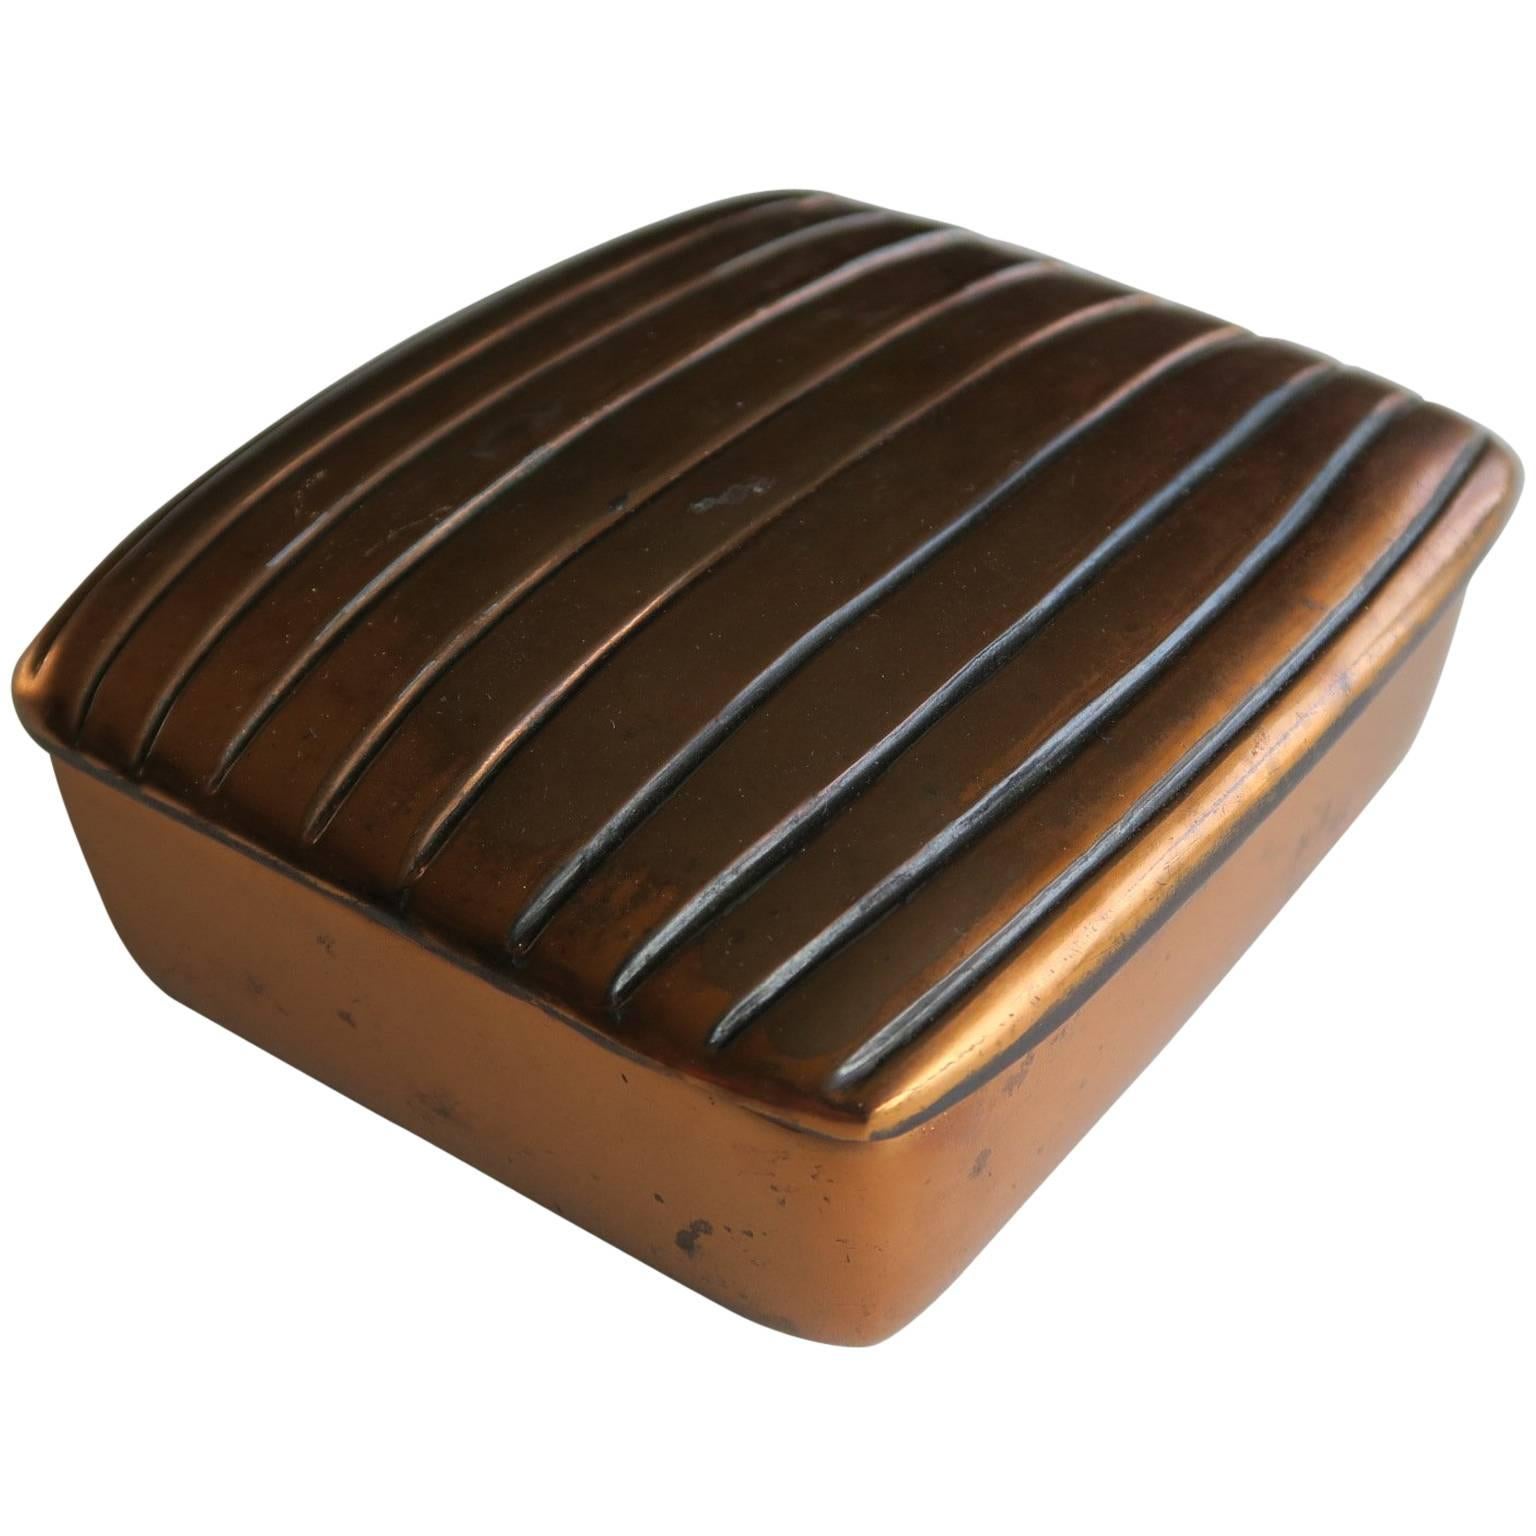 Vintage Decorative Copper-Plated Metal Box in Rectangular Form with Lines Design For Sale